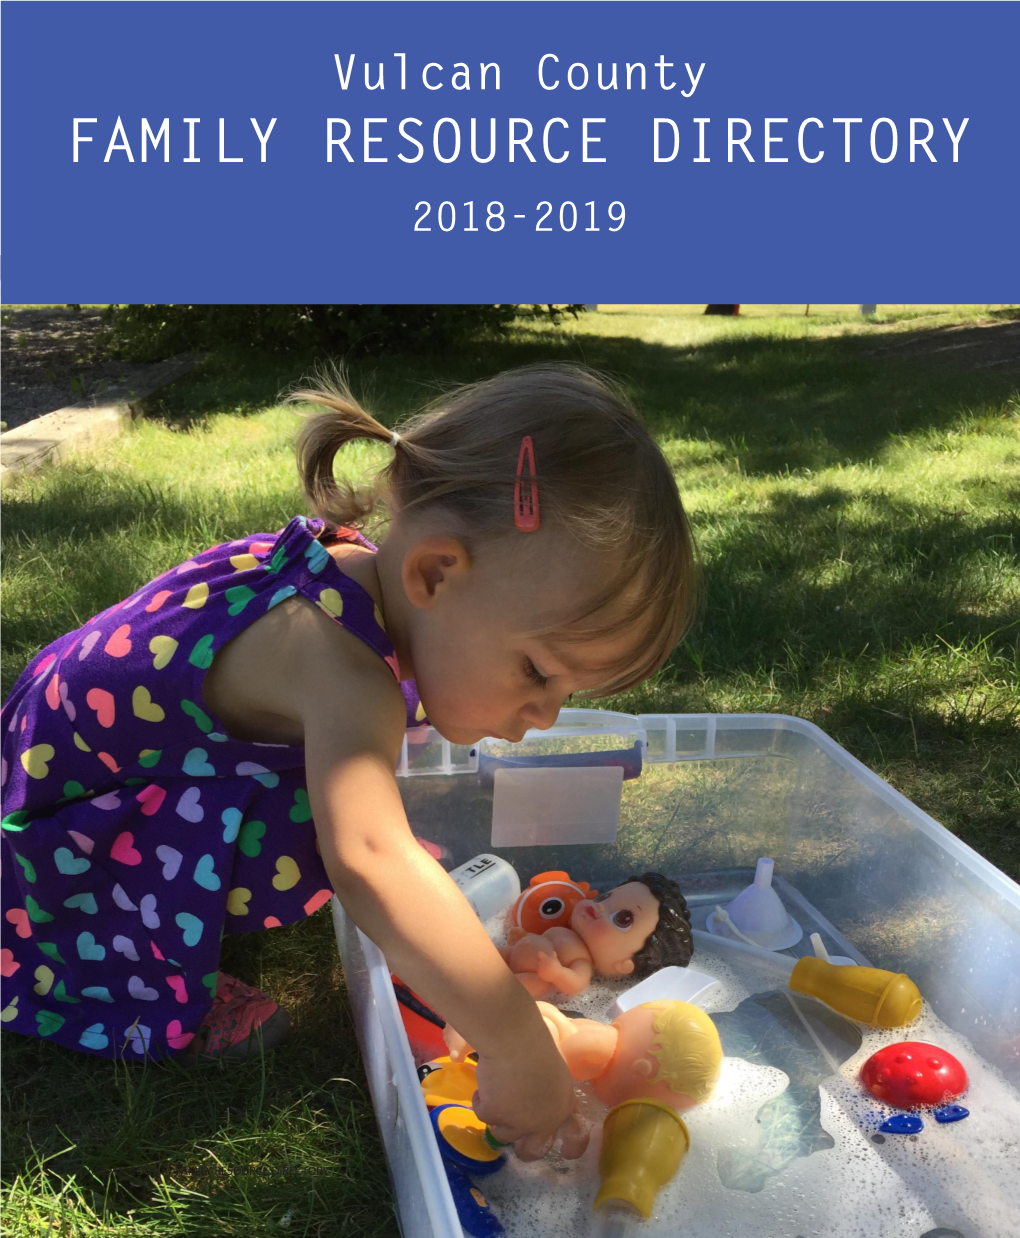 Family Resource Directory 2018-2019